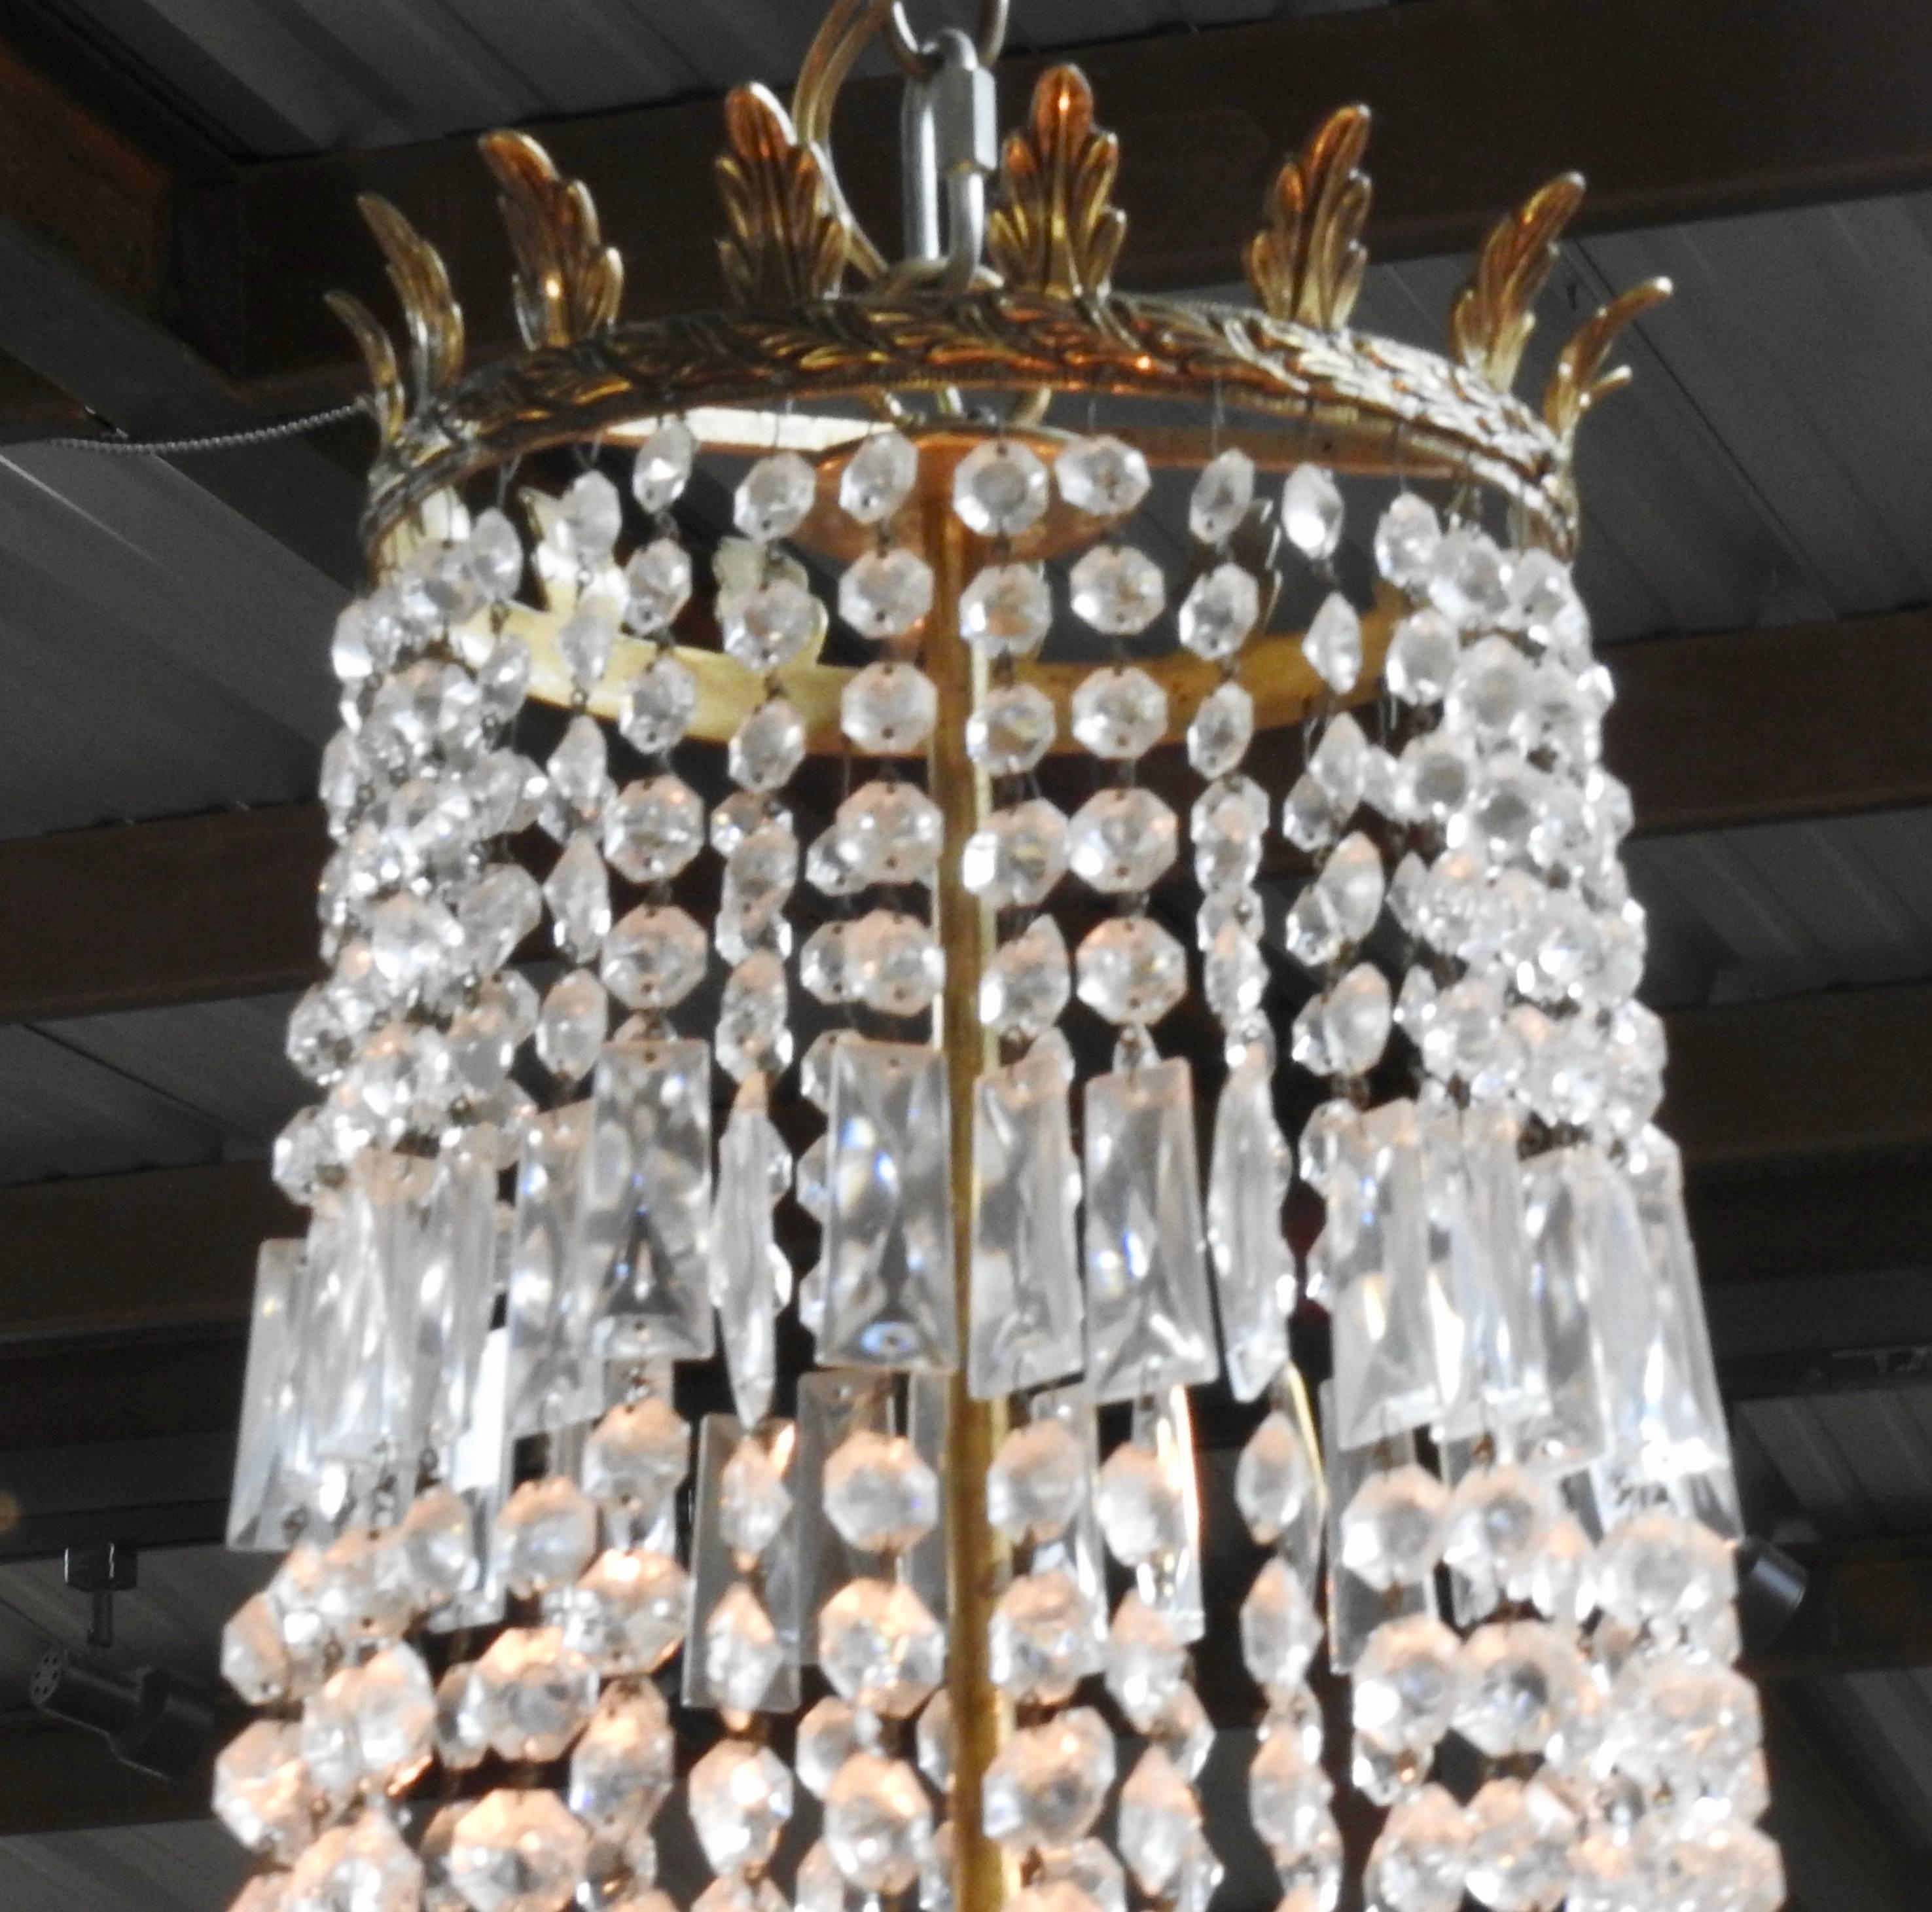 Stunning Empire chandelier from the early 20th century from France. Faceted crystal ropes with baguettes adorn the body of the fixture. Short plug drop crystals extend from the bobeches and the bottom cap. A crown with leaves tops off the crystals